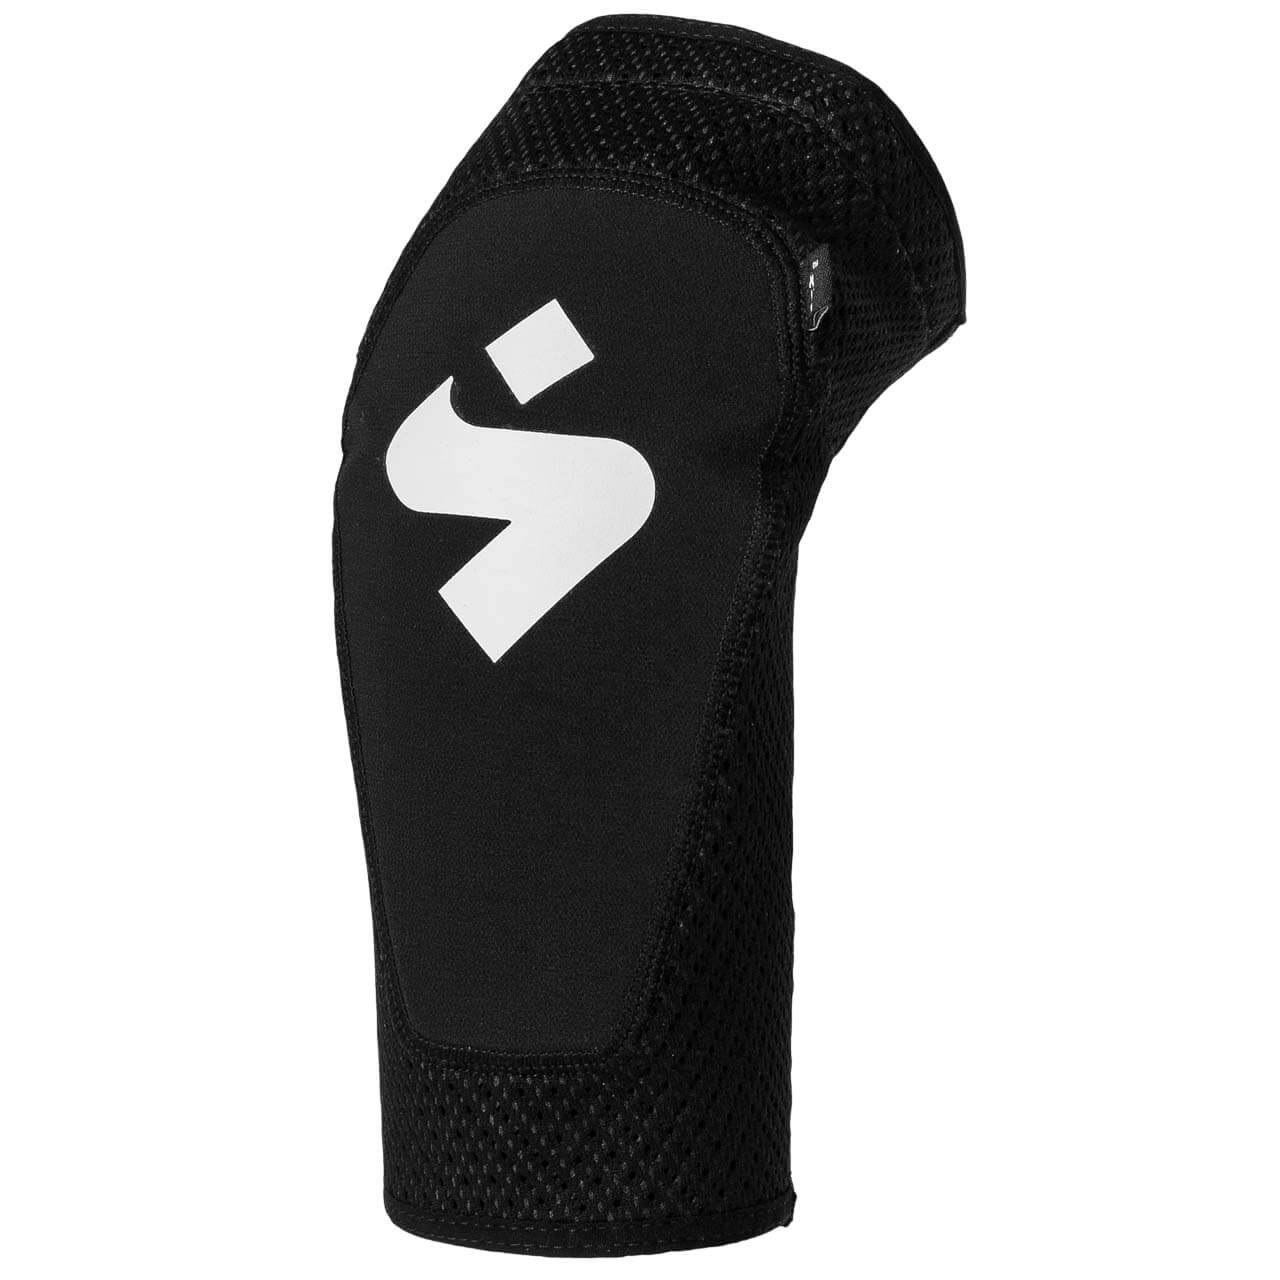 Sweet Protection Elbow Guards Light - Black, M